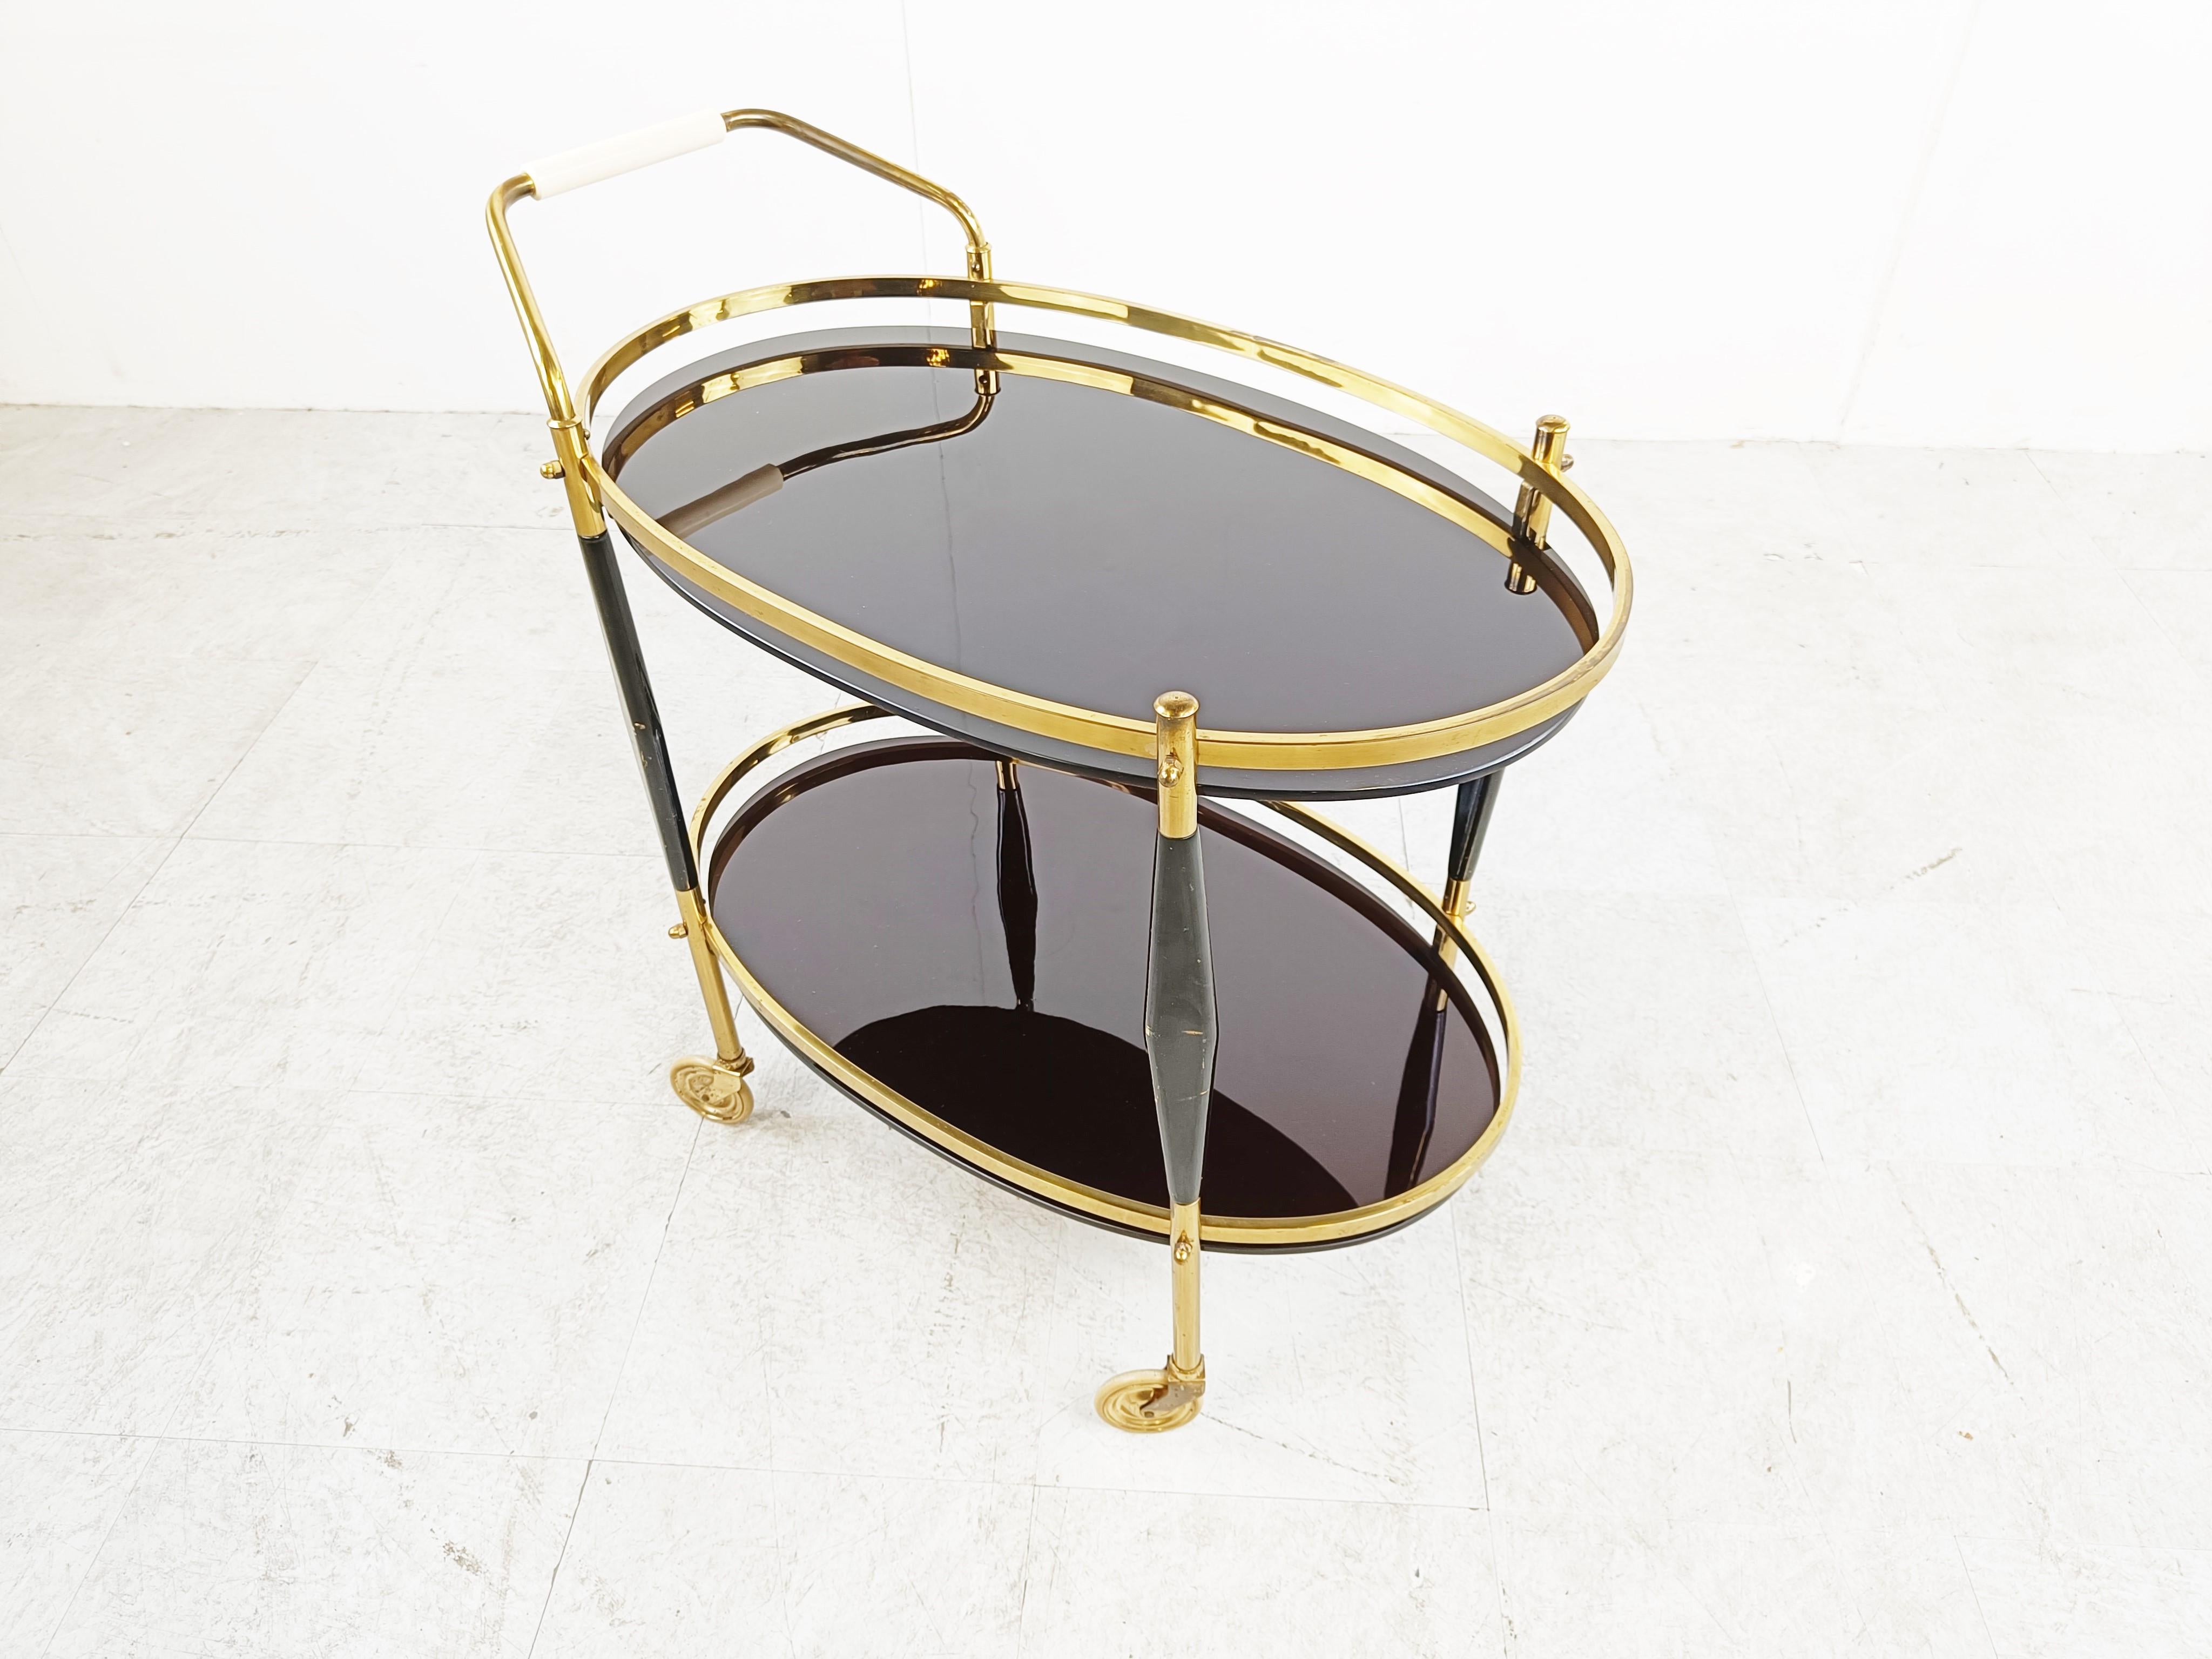 Mid century serving trolley by Cesare Lacca.

Beautiful black lacquered wooden and brass frame with black glasses.

1950s - Italy

Dimensions:
Height: 72cm/28.34